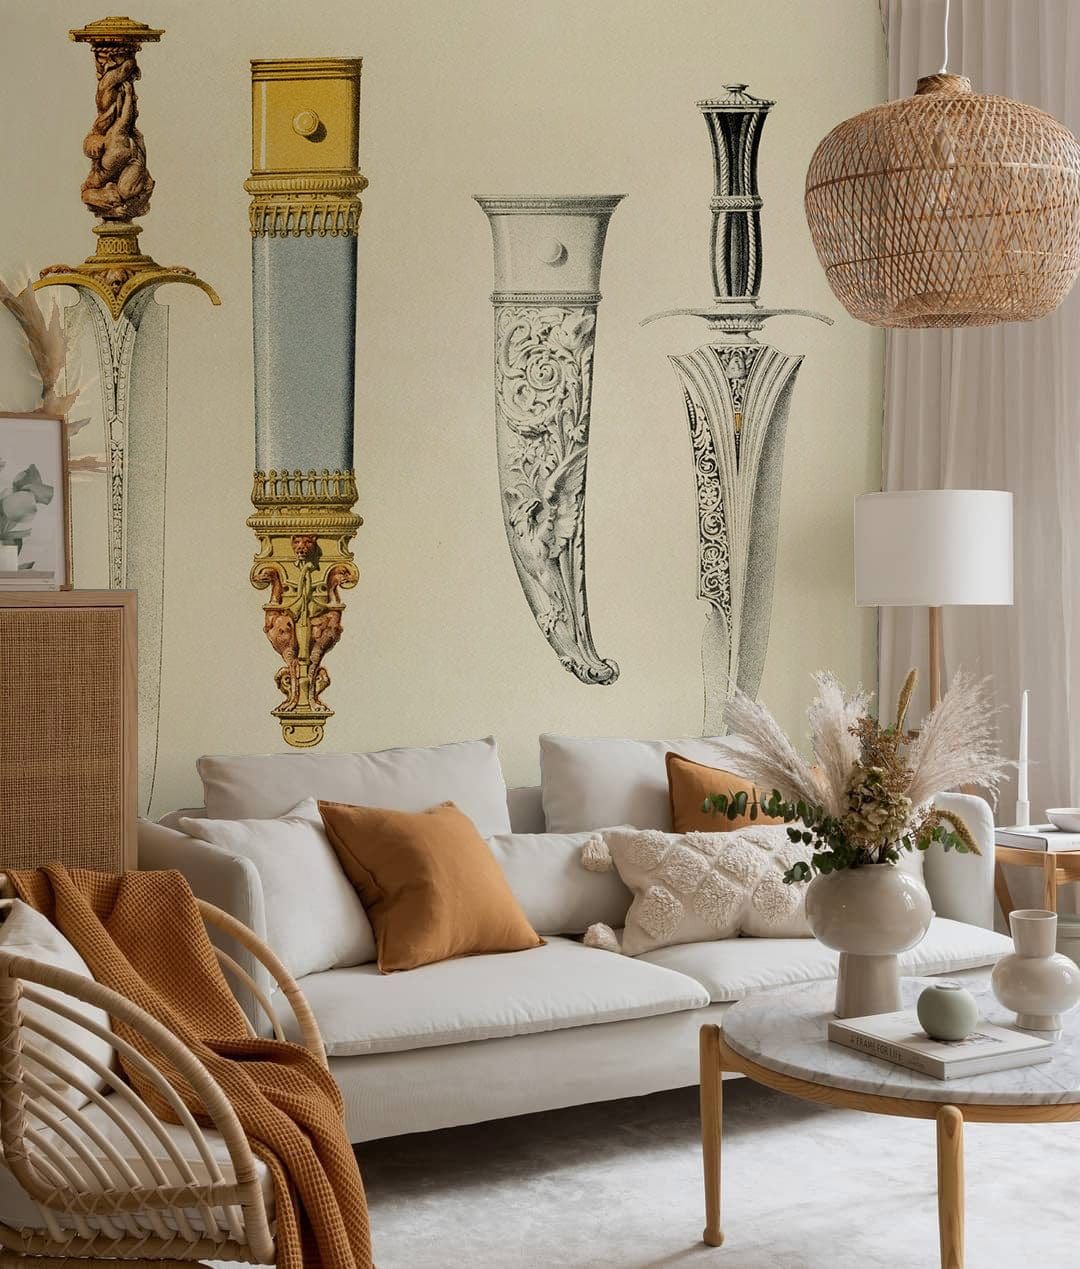 classical classical Daggers Wallpaper Mural for living Room decor